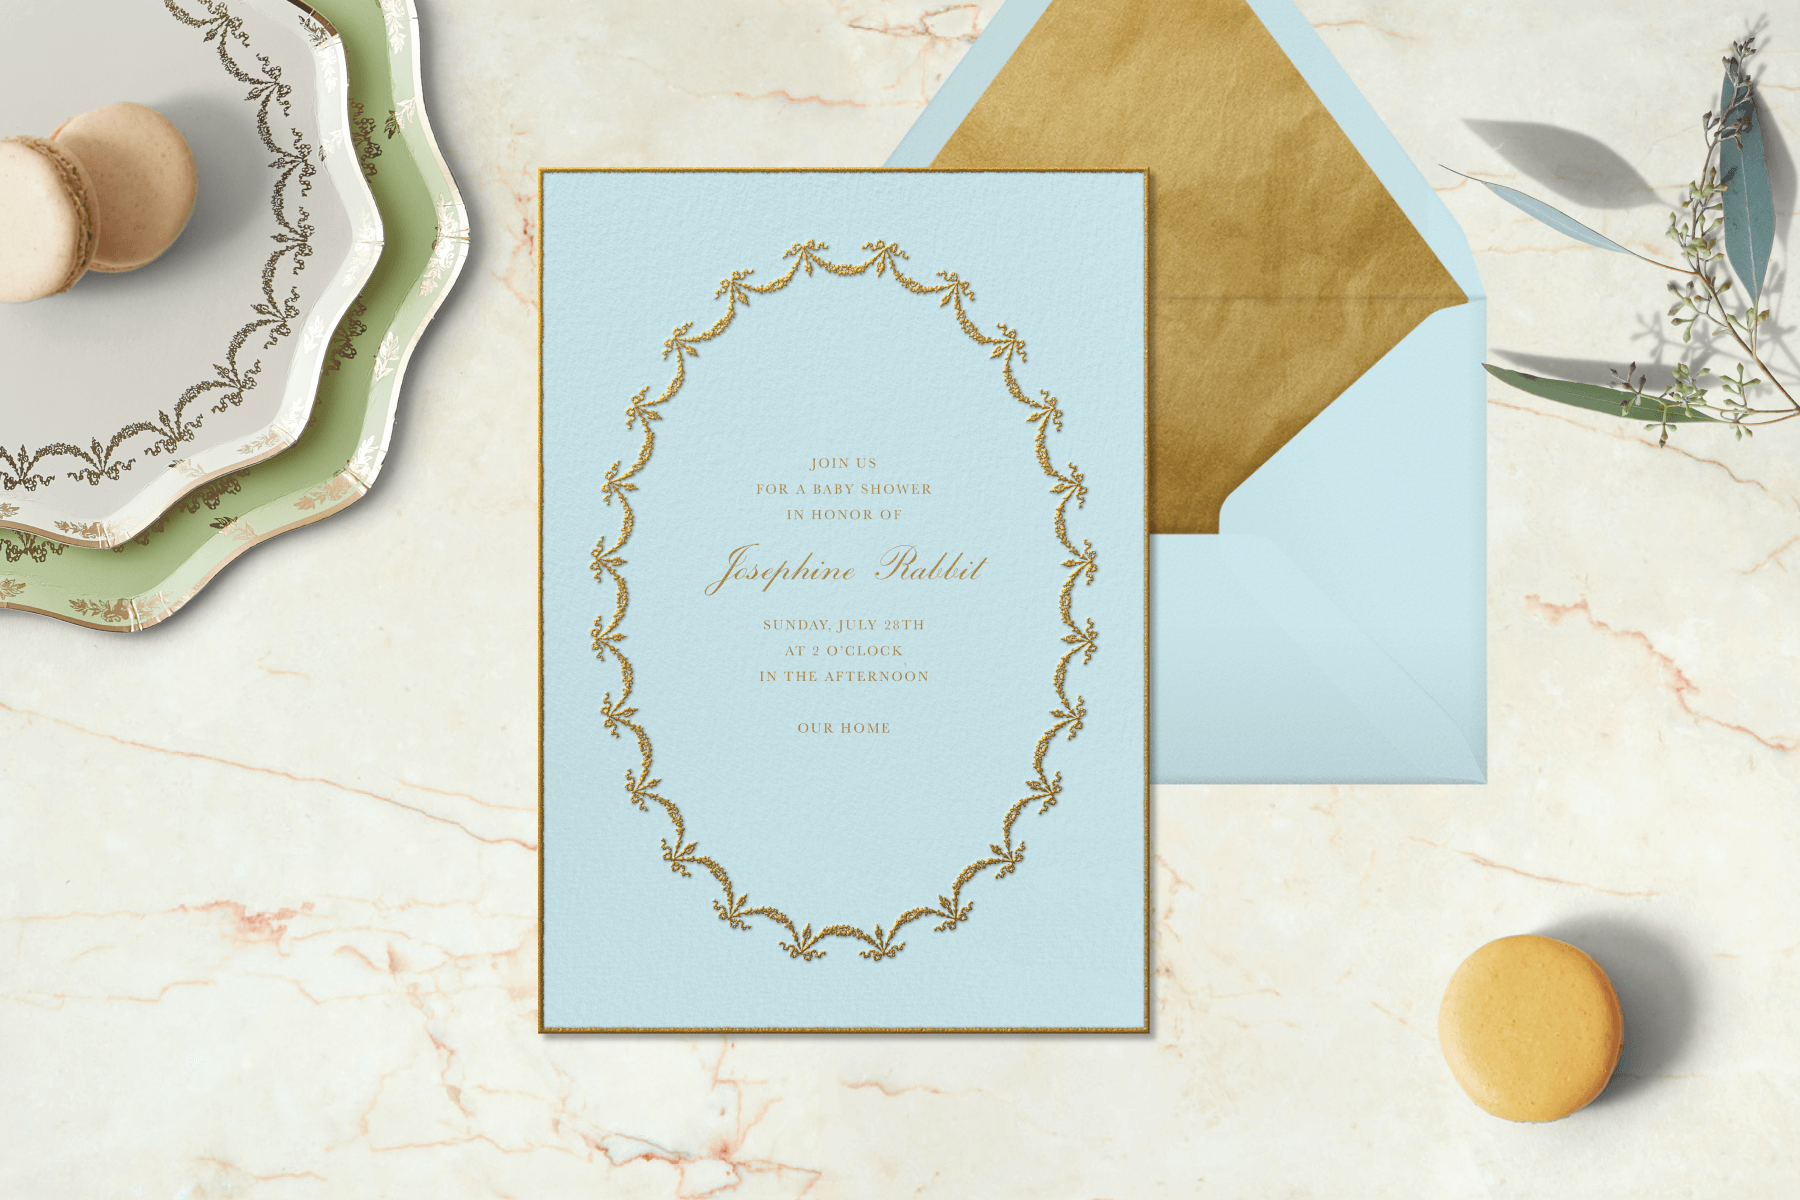 A blue Ladurée invitation surrounded by macarons and plates.